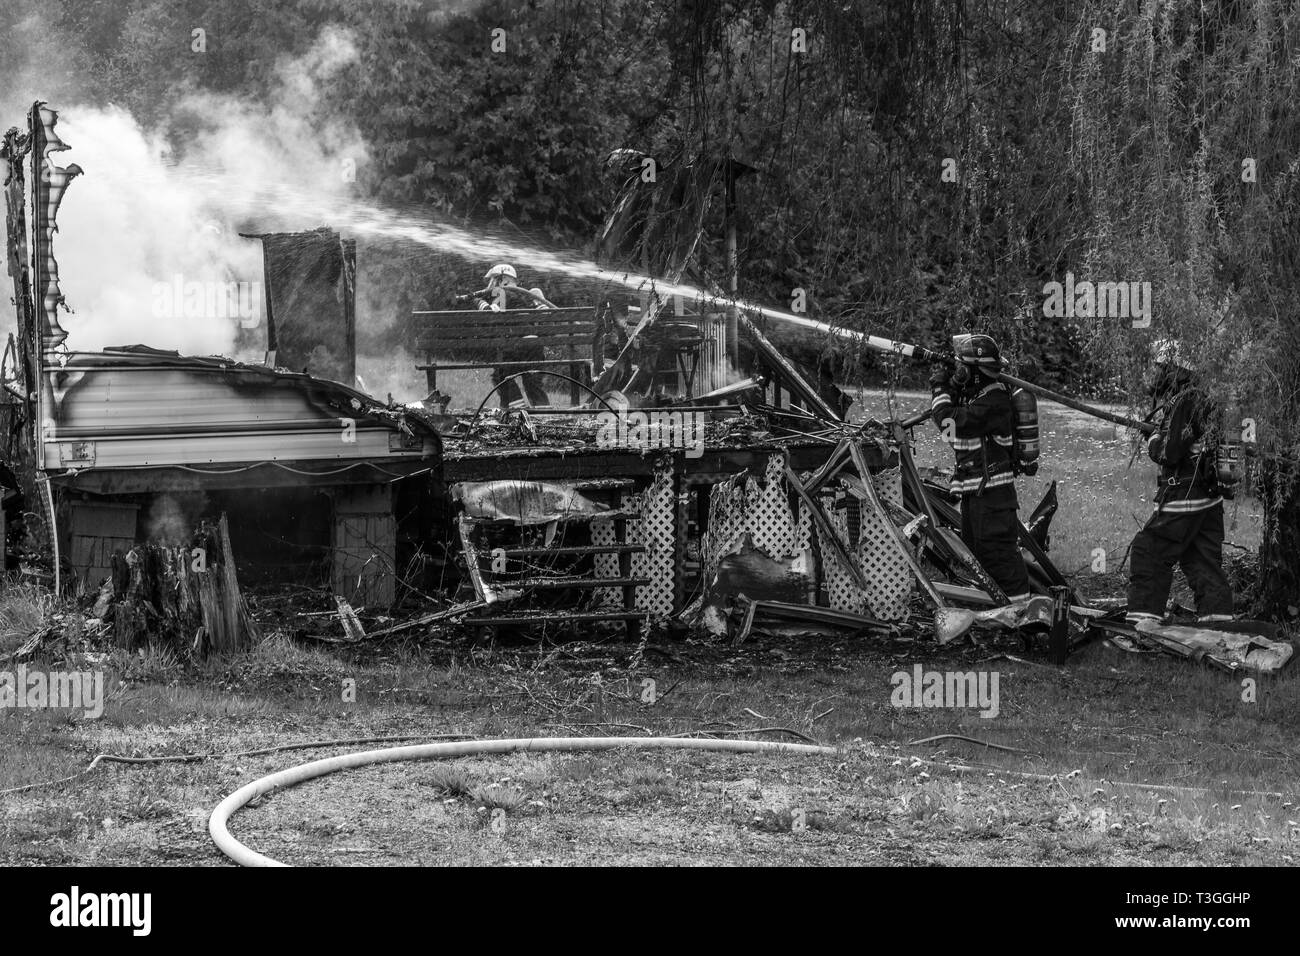 Remains of a camp trailer fire showing burnt out parts Stock Photo